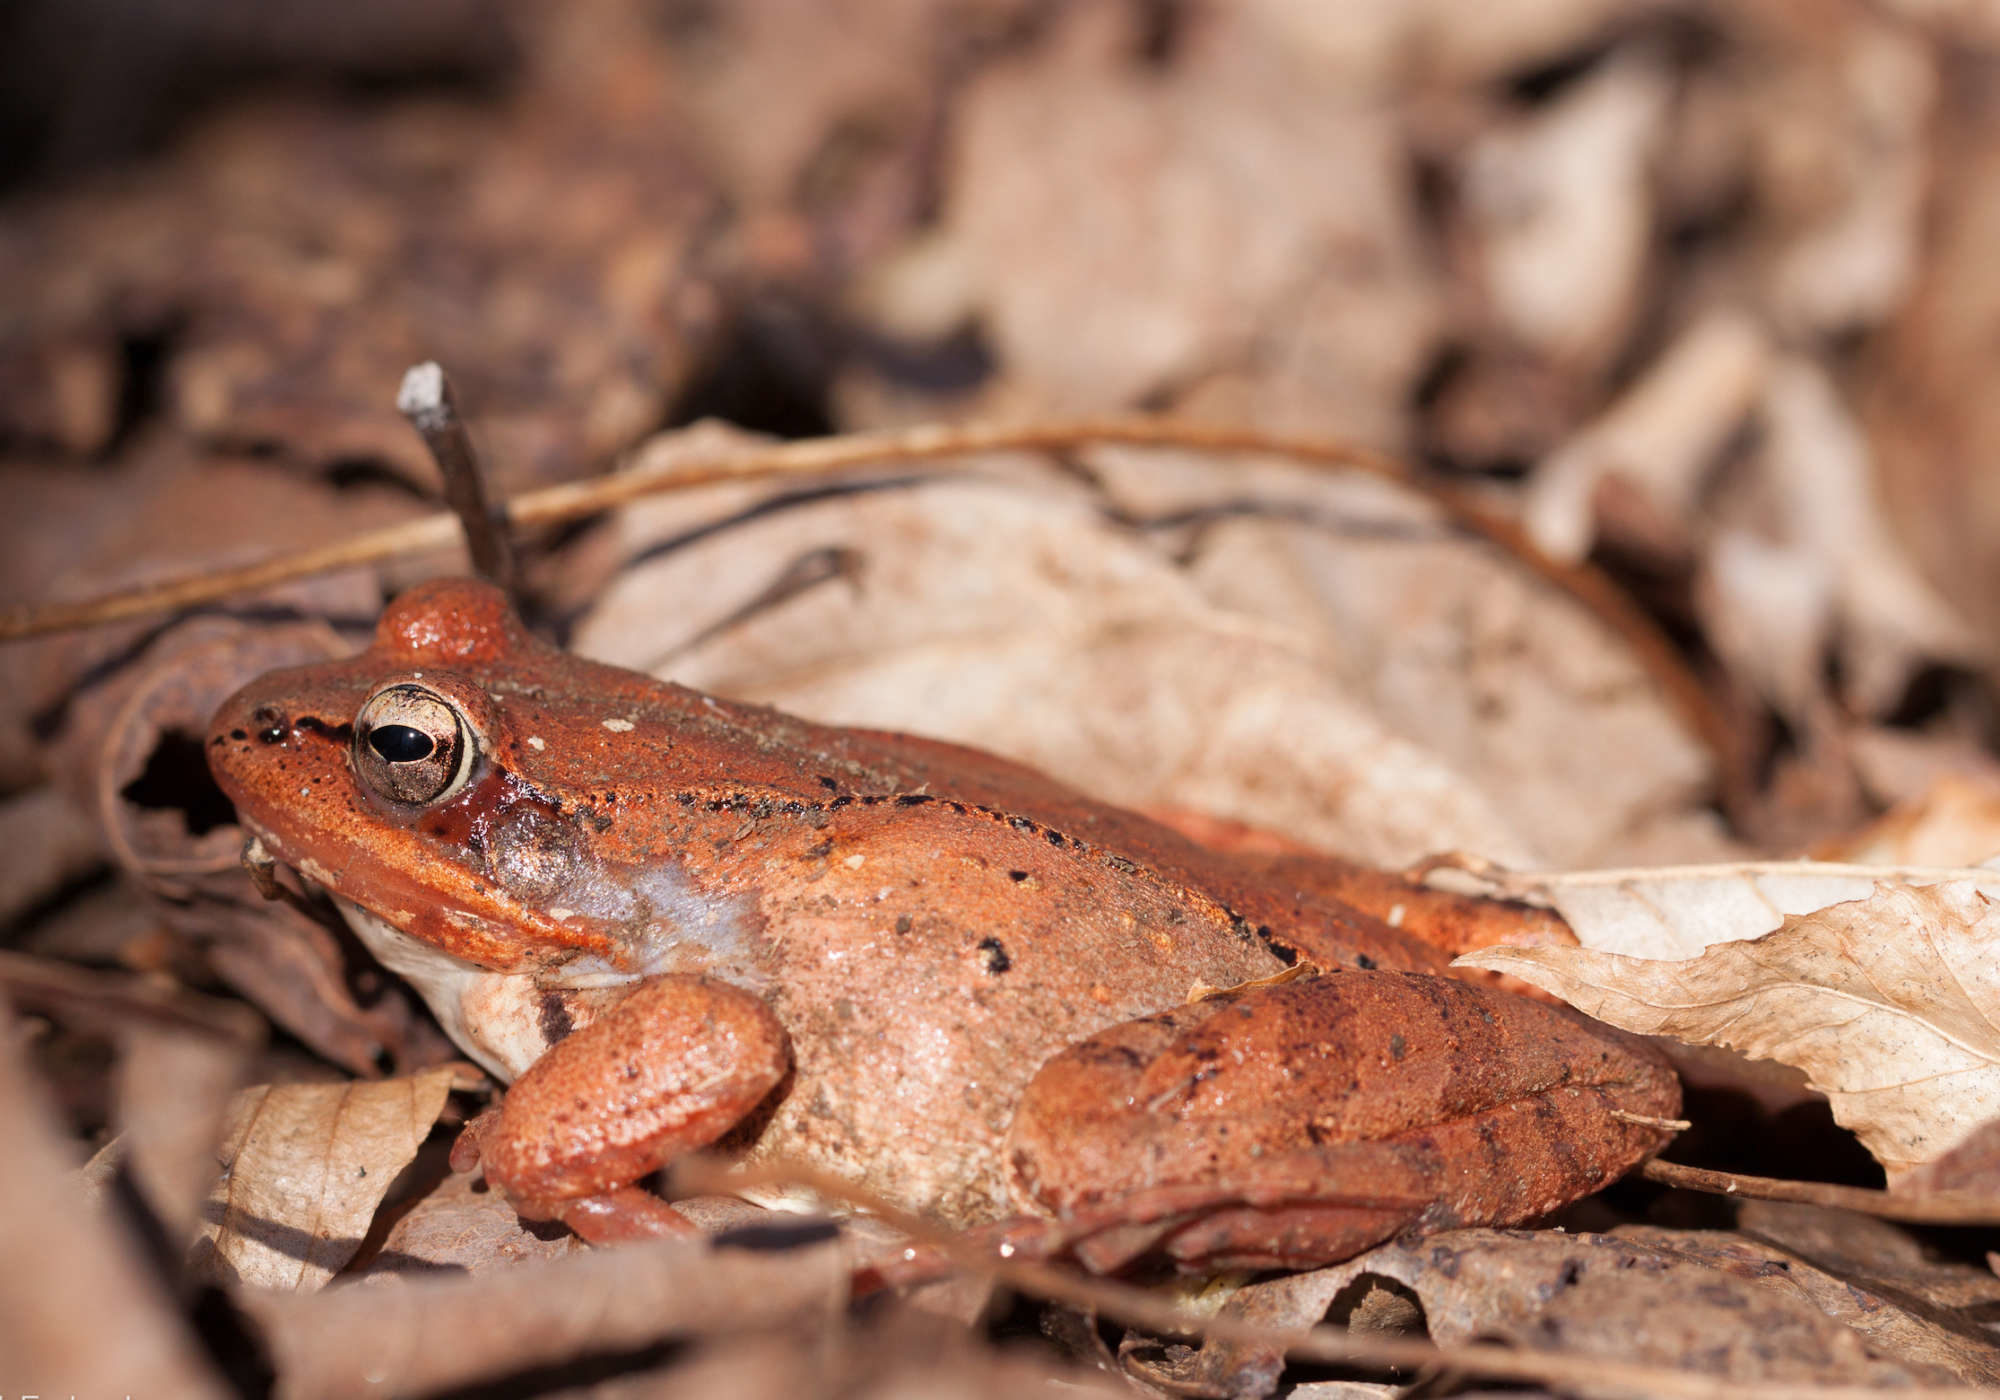 Wood Frog emerging in early spring. Kent McFarland